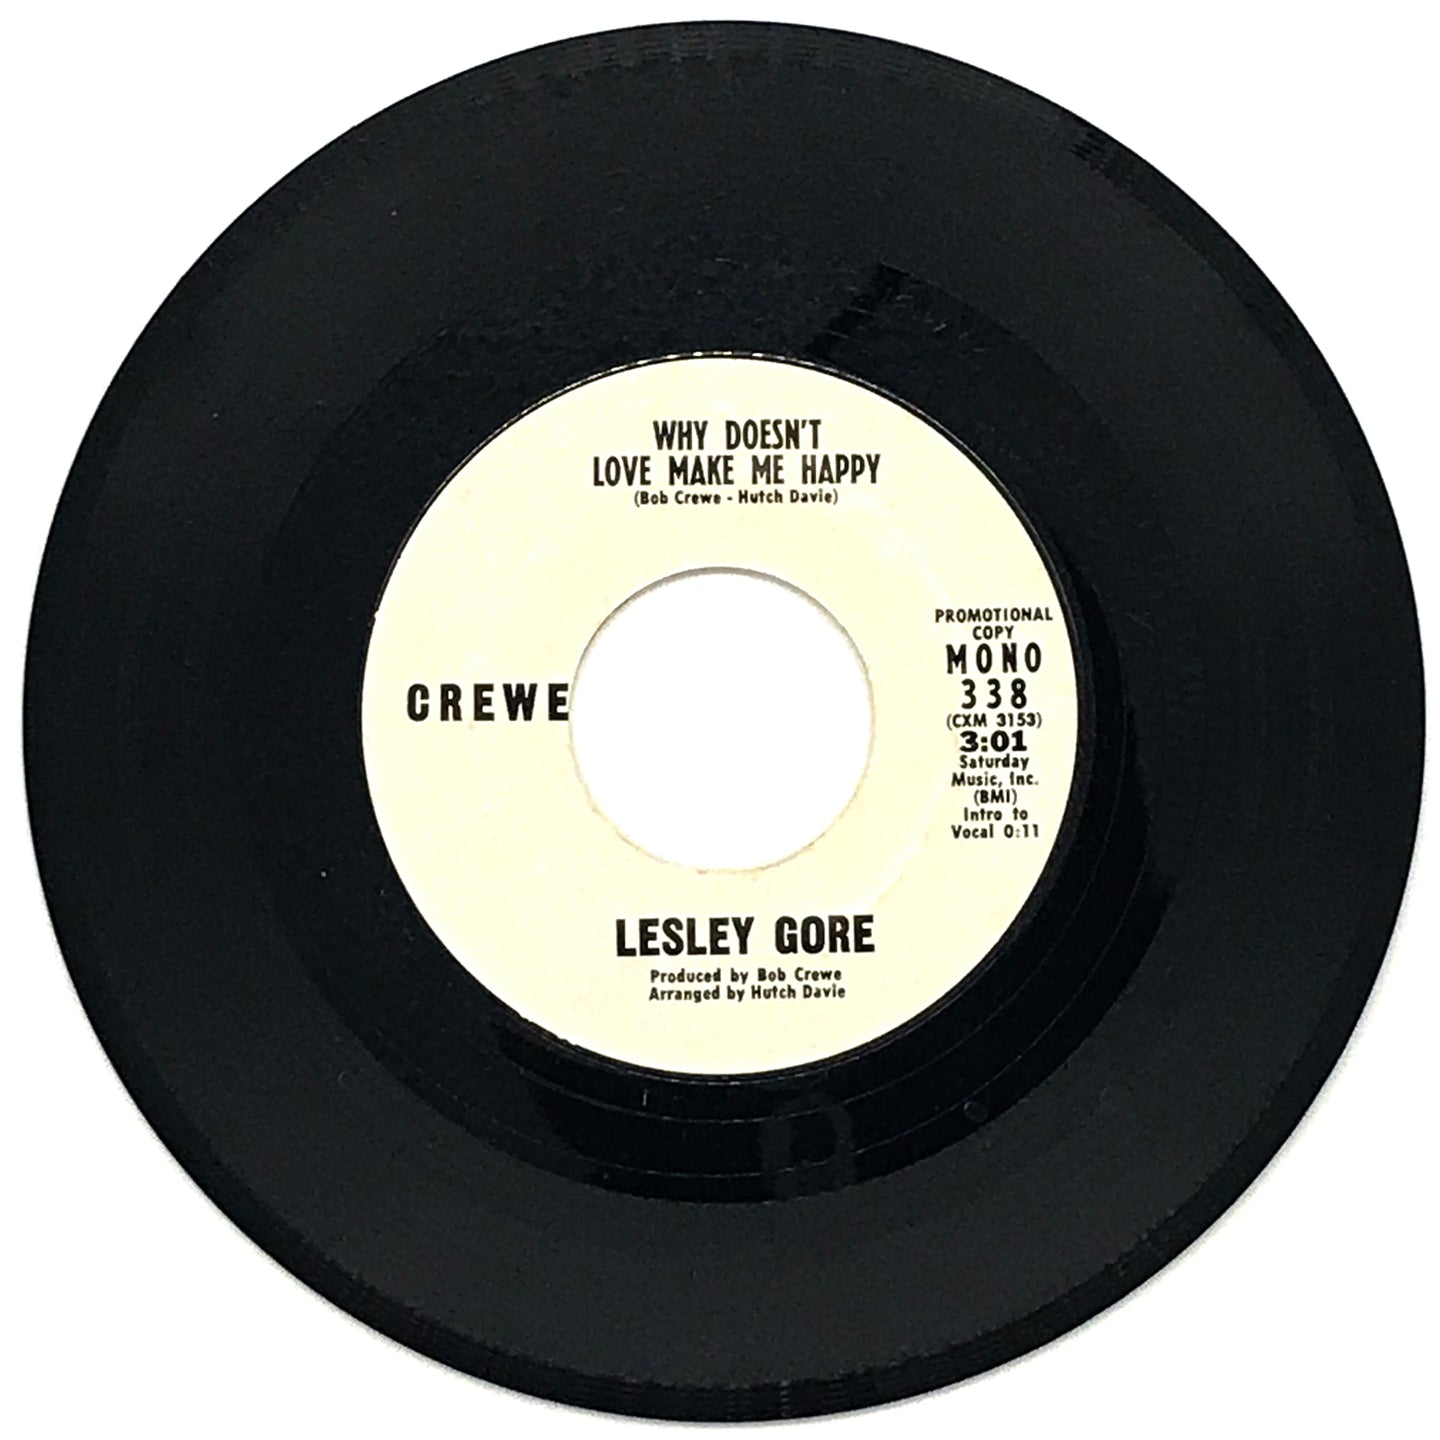 Lesley Gore : WHY DOESN'T LOVE MAKE ME HAPPY/ WHY DOESN'T LOVE MAKE ME HAPPY